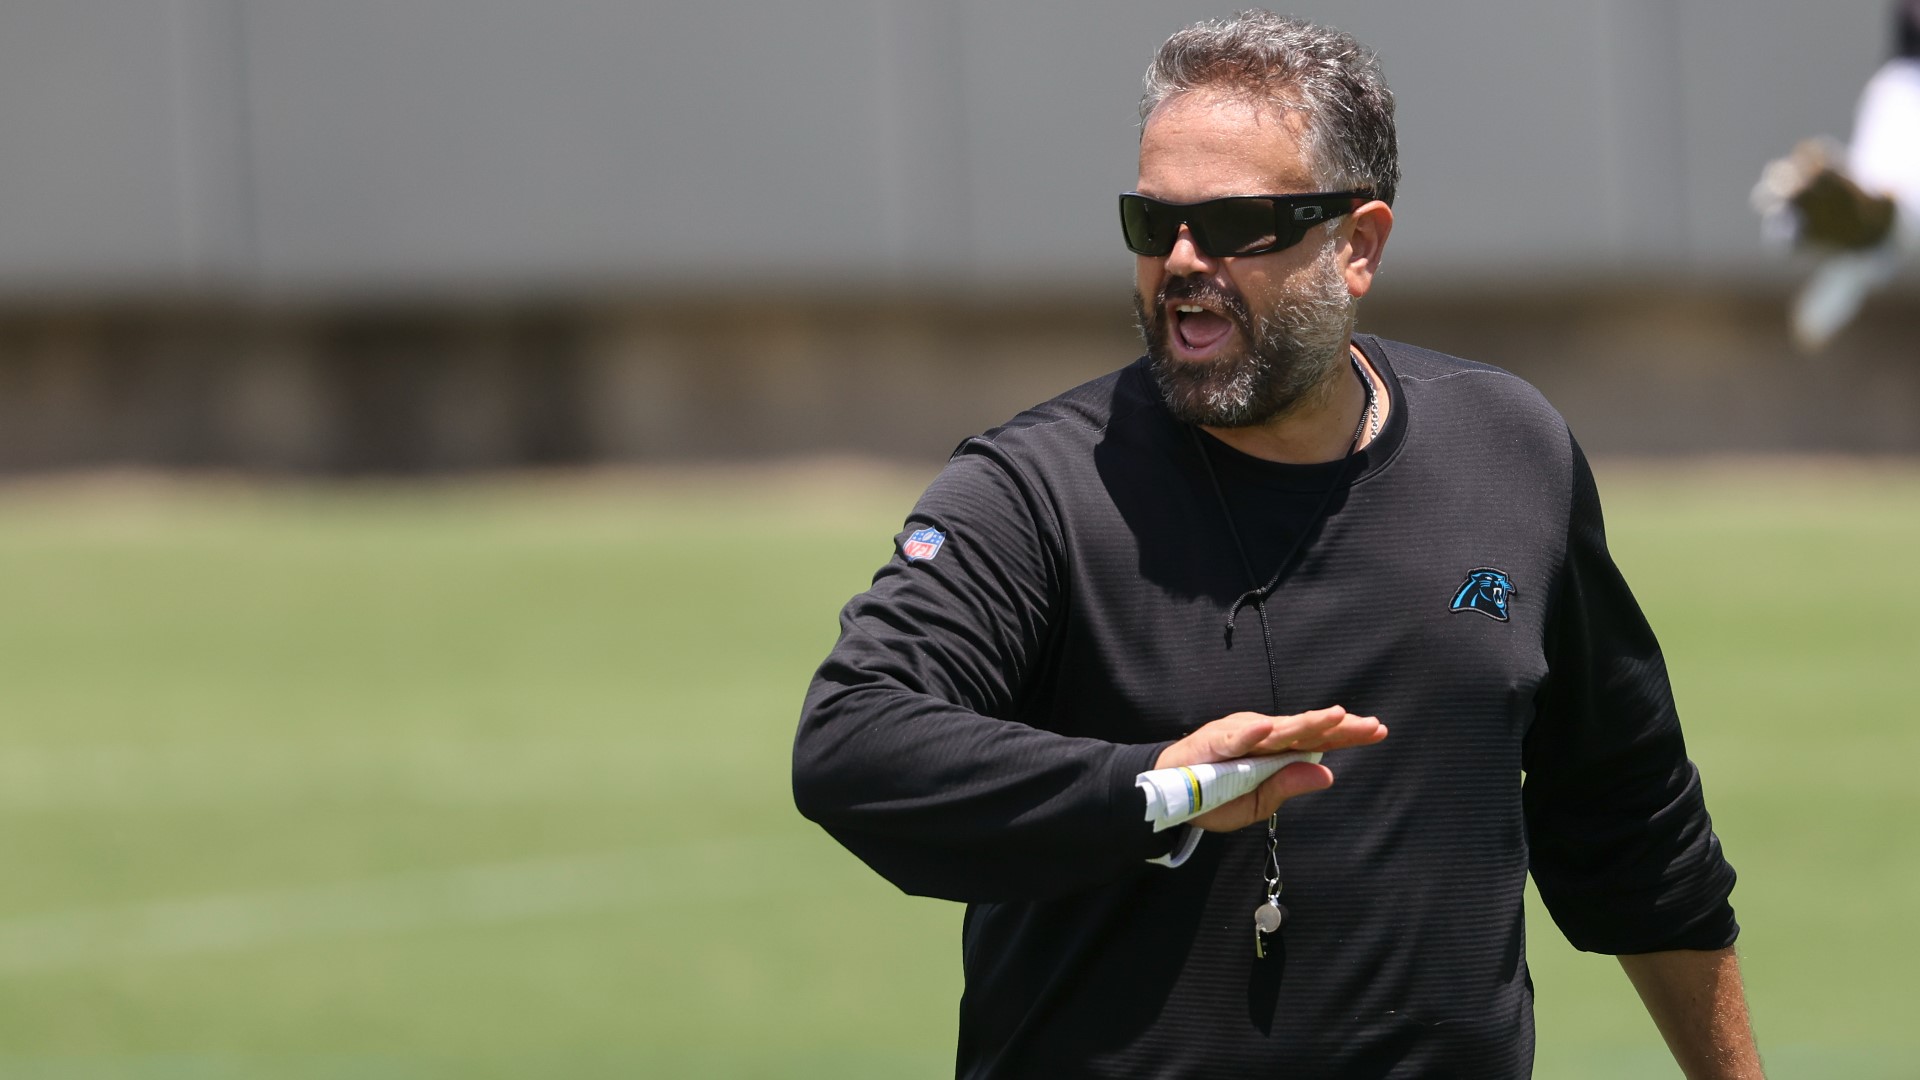 In an exclusive interview with WCNC Charlotte, Panthers head coach Matt Rhule says his team wants to turn QB Sam Darnold into a "really consistent" player.